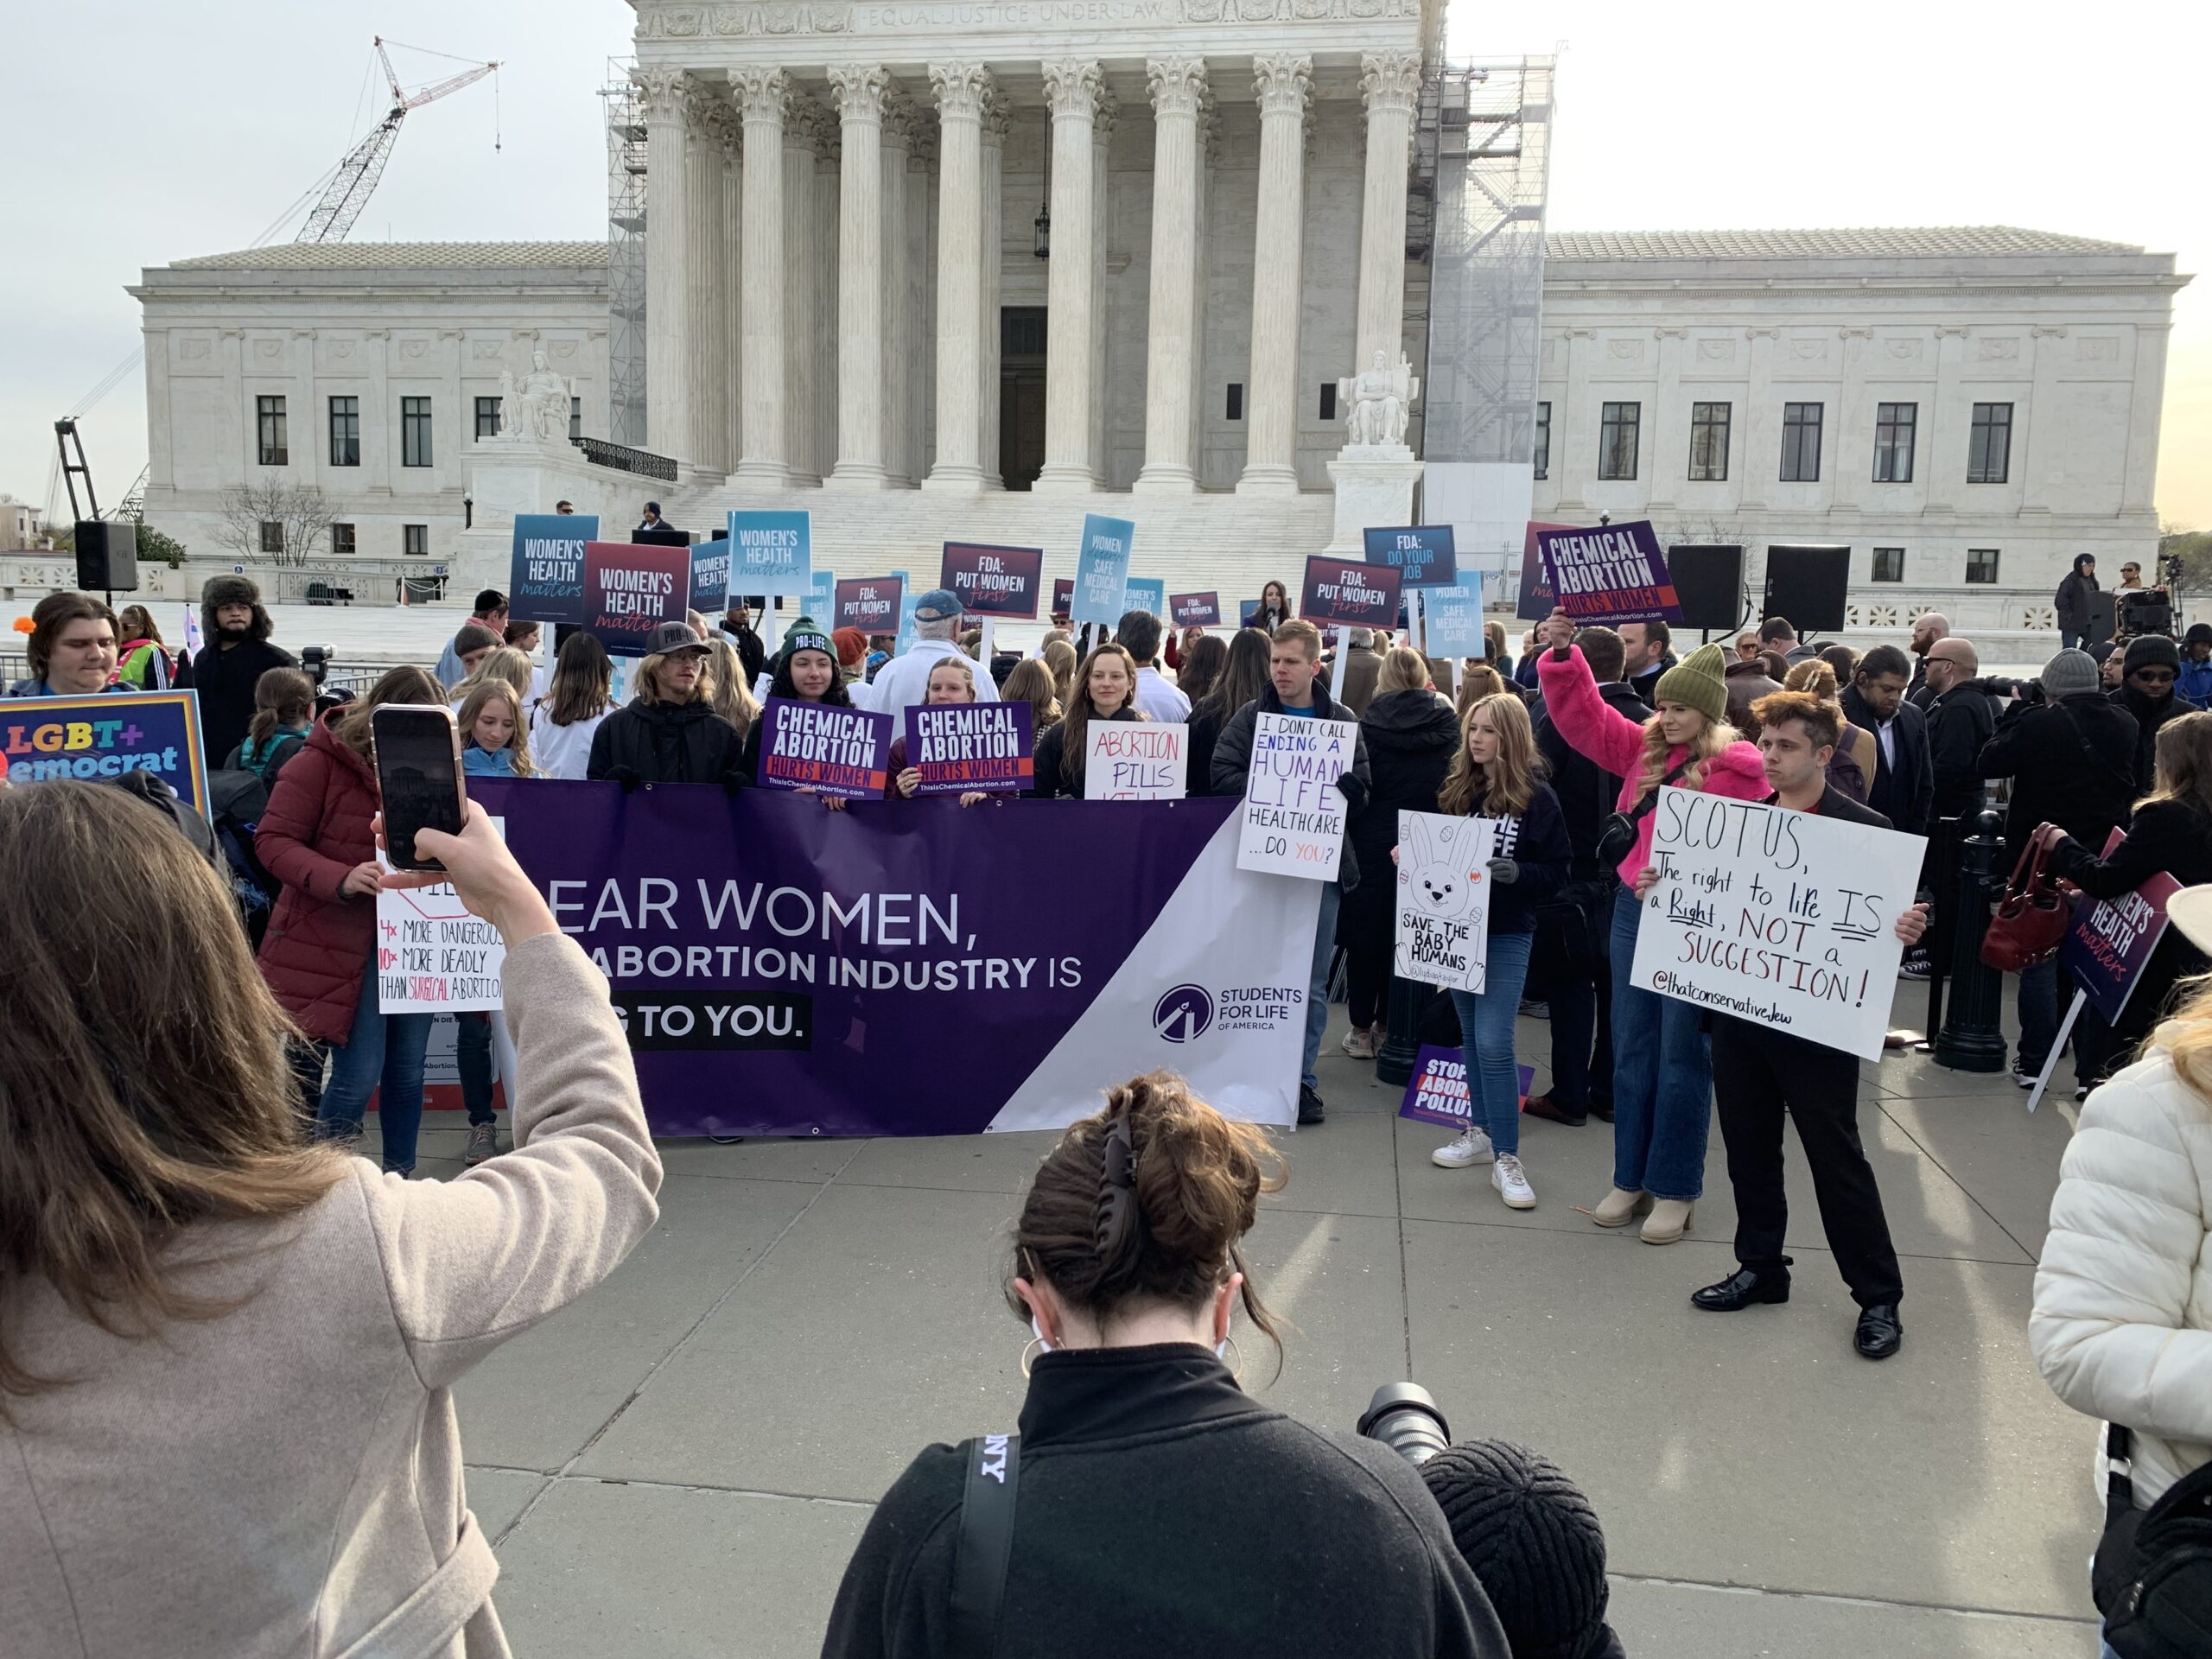 Medical professionals gather at the Supreme Court to protest FDA’s alleged negligence in overseeing a dangerous abortion drug